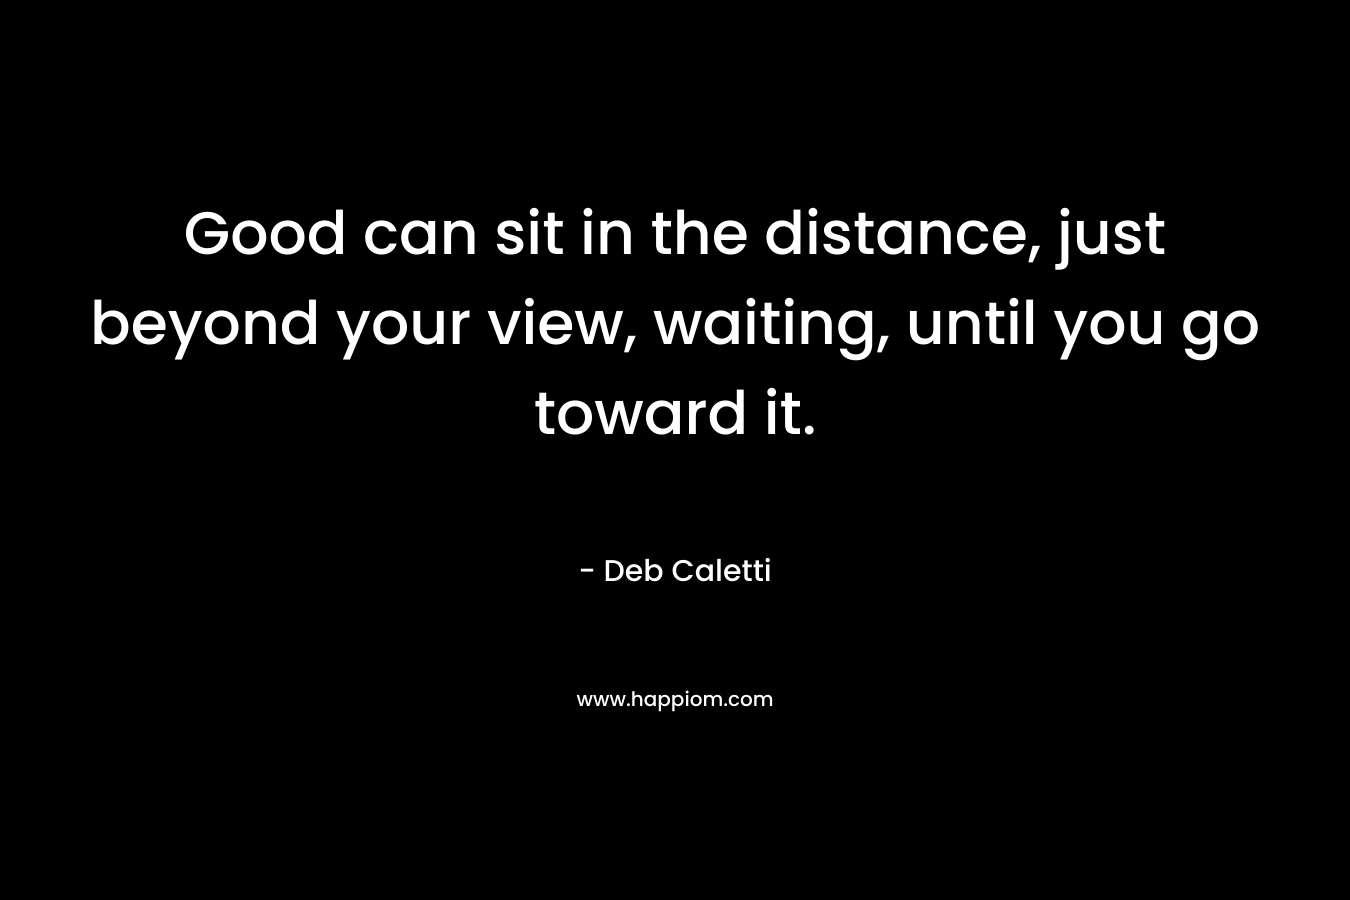 Good can sit in the distance, just beyond your view, waiting, until you go toward it.